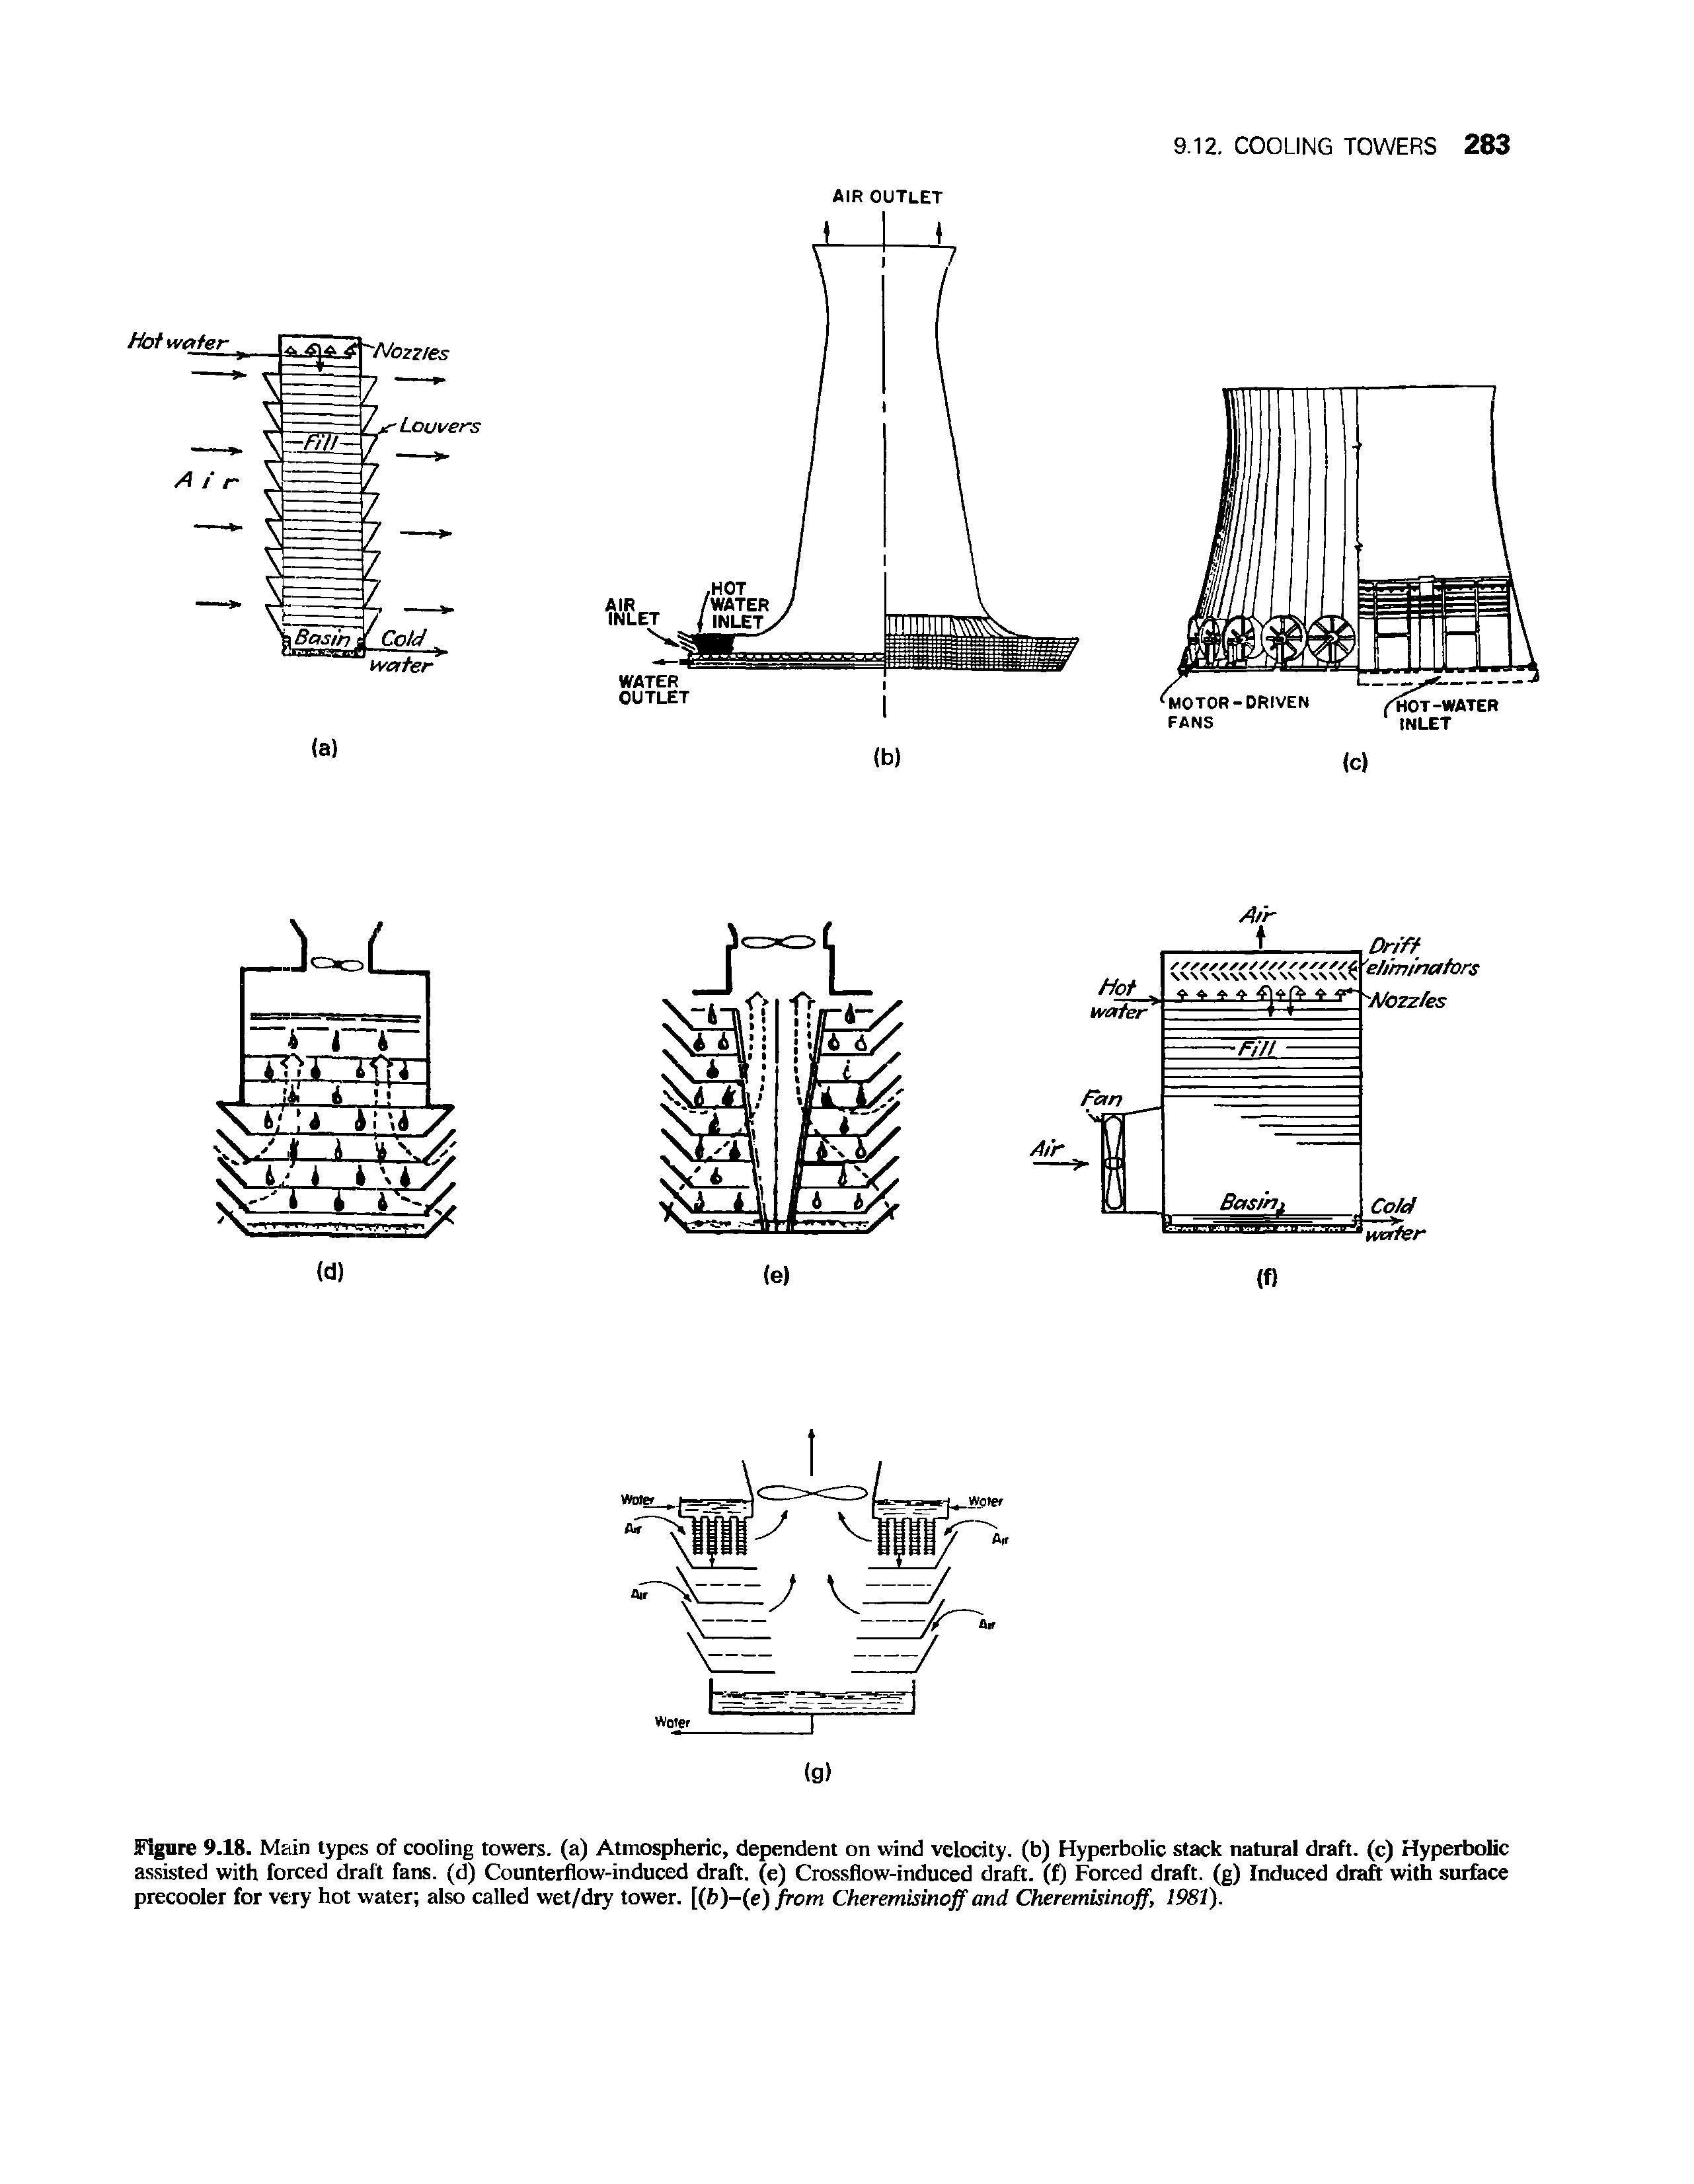 Figure 9.18. Main types of cooling towers, (a) Atmospheric, dependent on wind velocity, (b) Hyperbolic stack natural draft, (c) Hyperbolic assisted with forced draft fans, (d) Counterflow-induced draft, (e) Crossflow-induced draft, (f) Forced draft, (g) Induced draft with surface precooler for very hot water also called wet/dry tower, [(fc)-(e) from Cheremisinoff and Cheremisinoff, 1981).